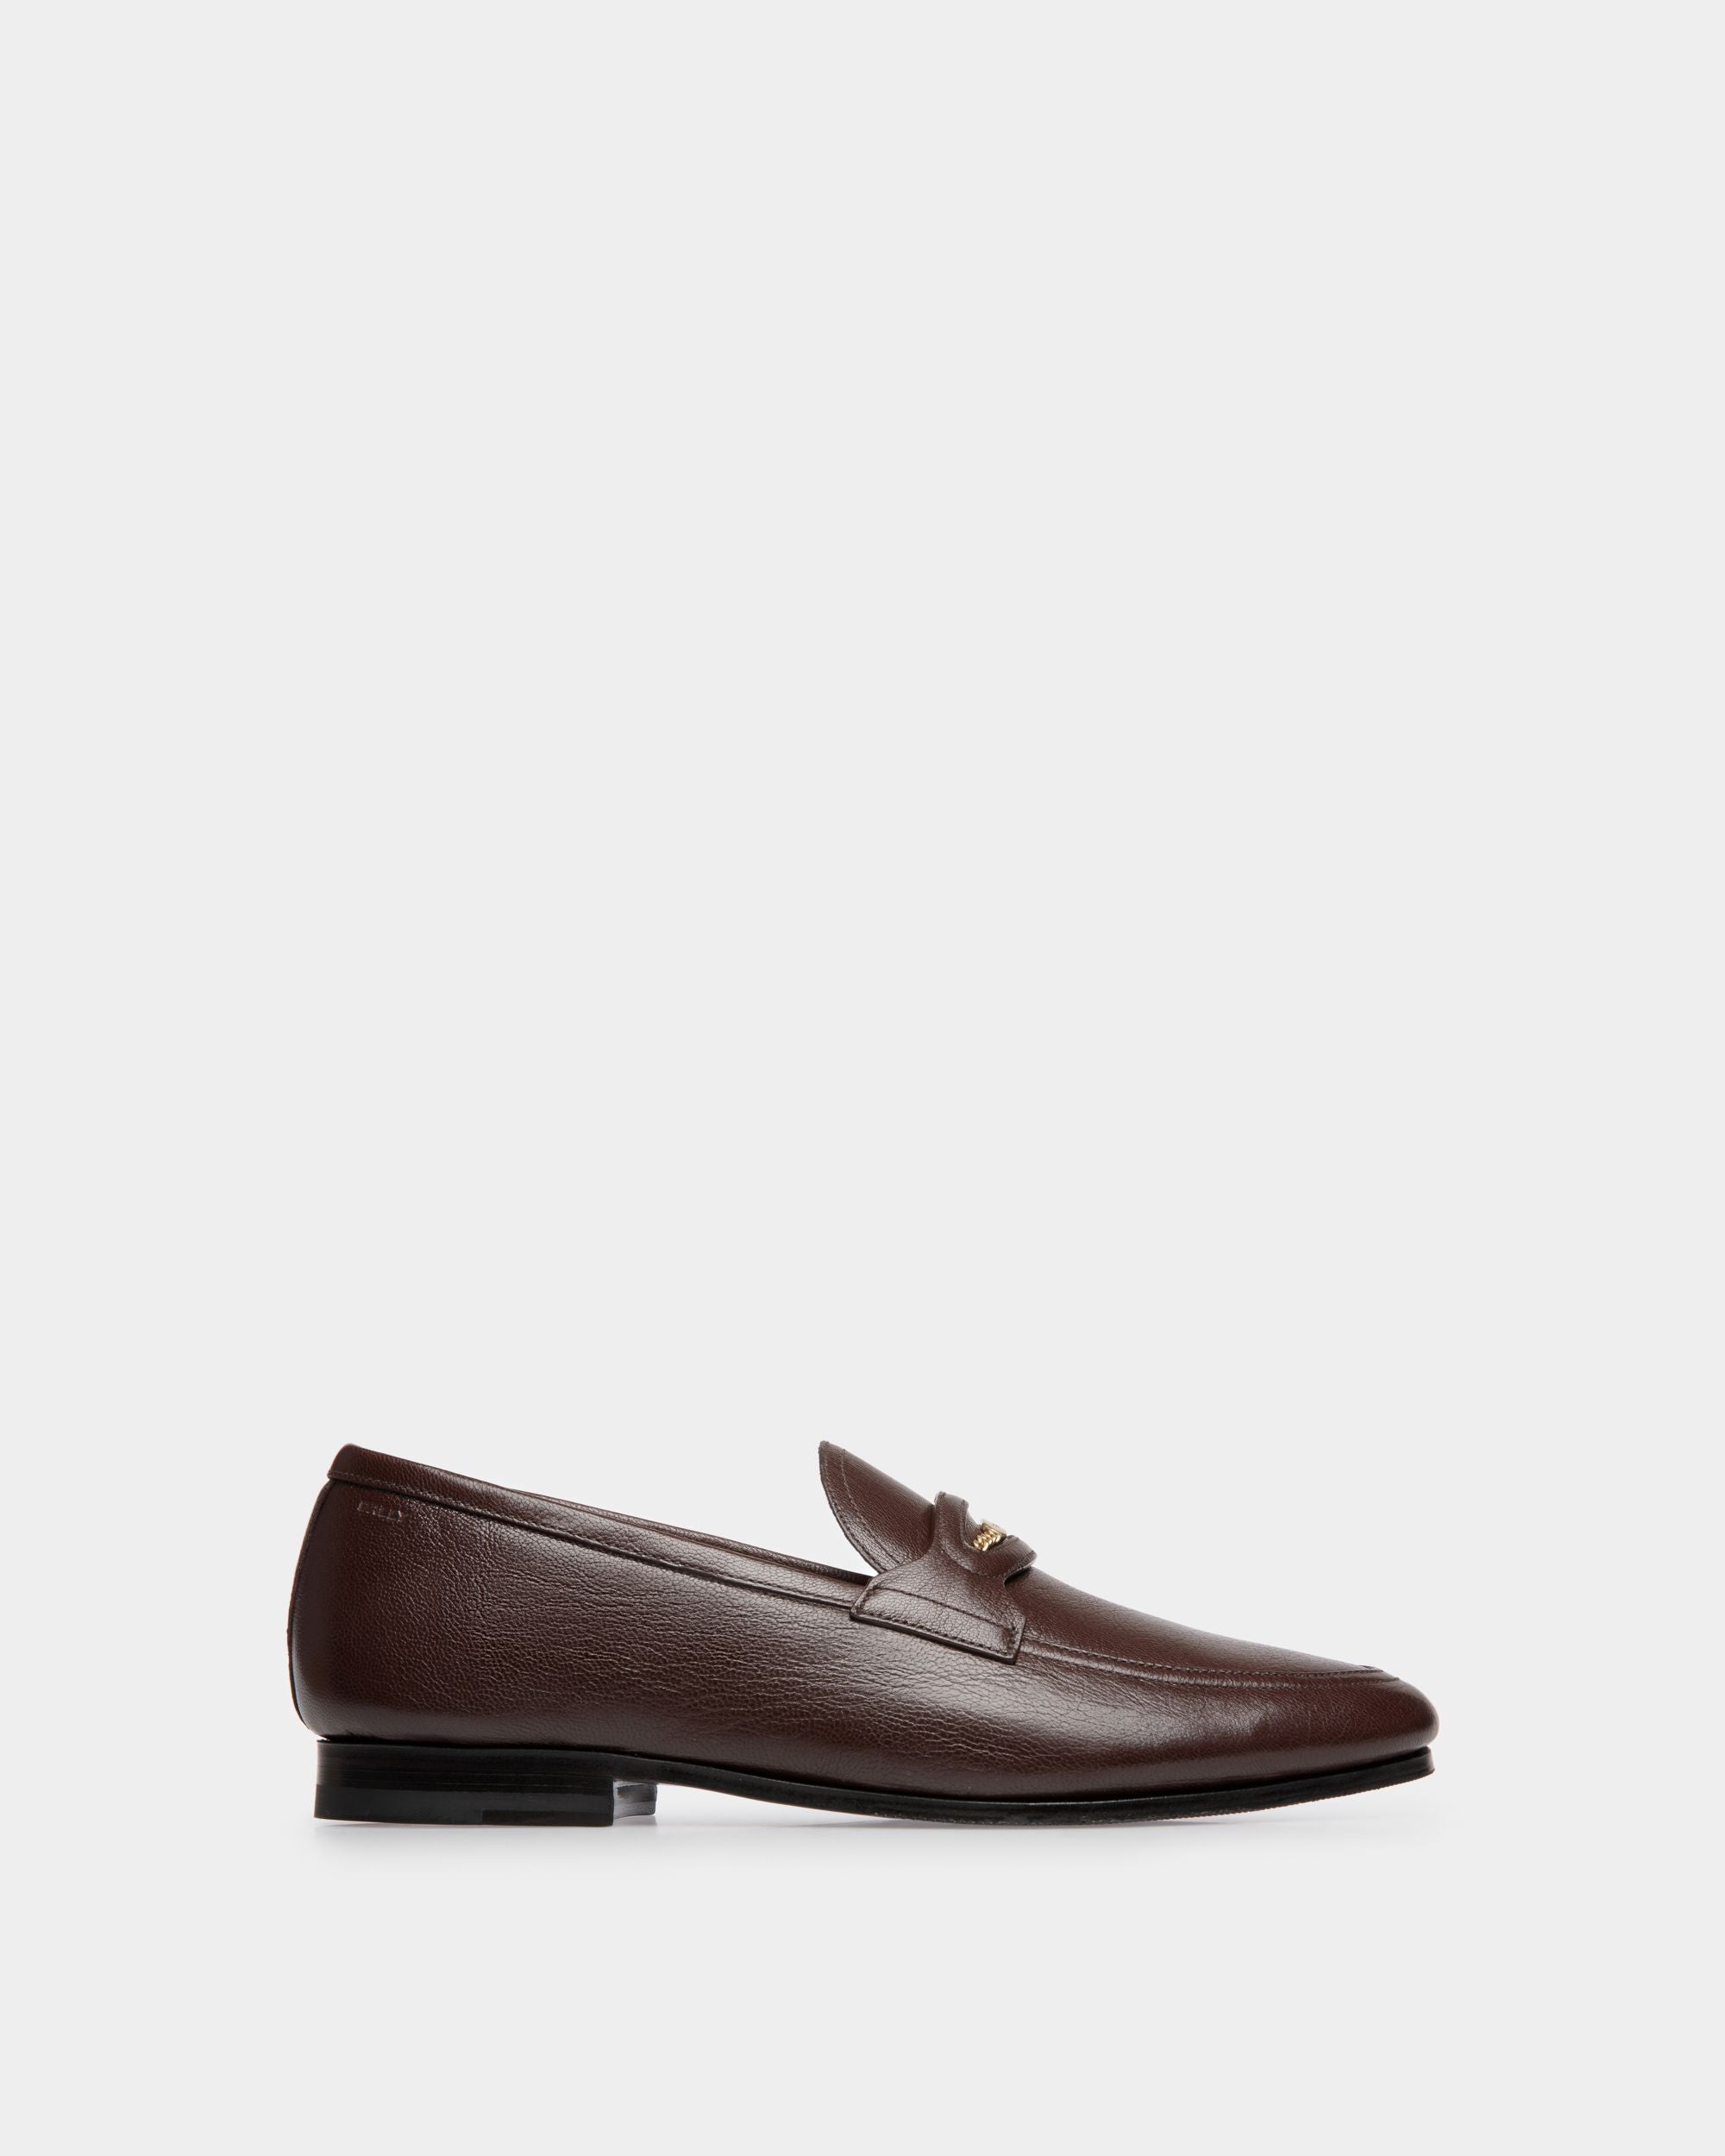 Plume | Men's Loafer in Brown Grained Leather | Bally | Still Life Side